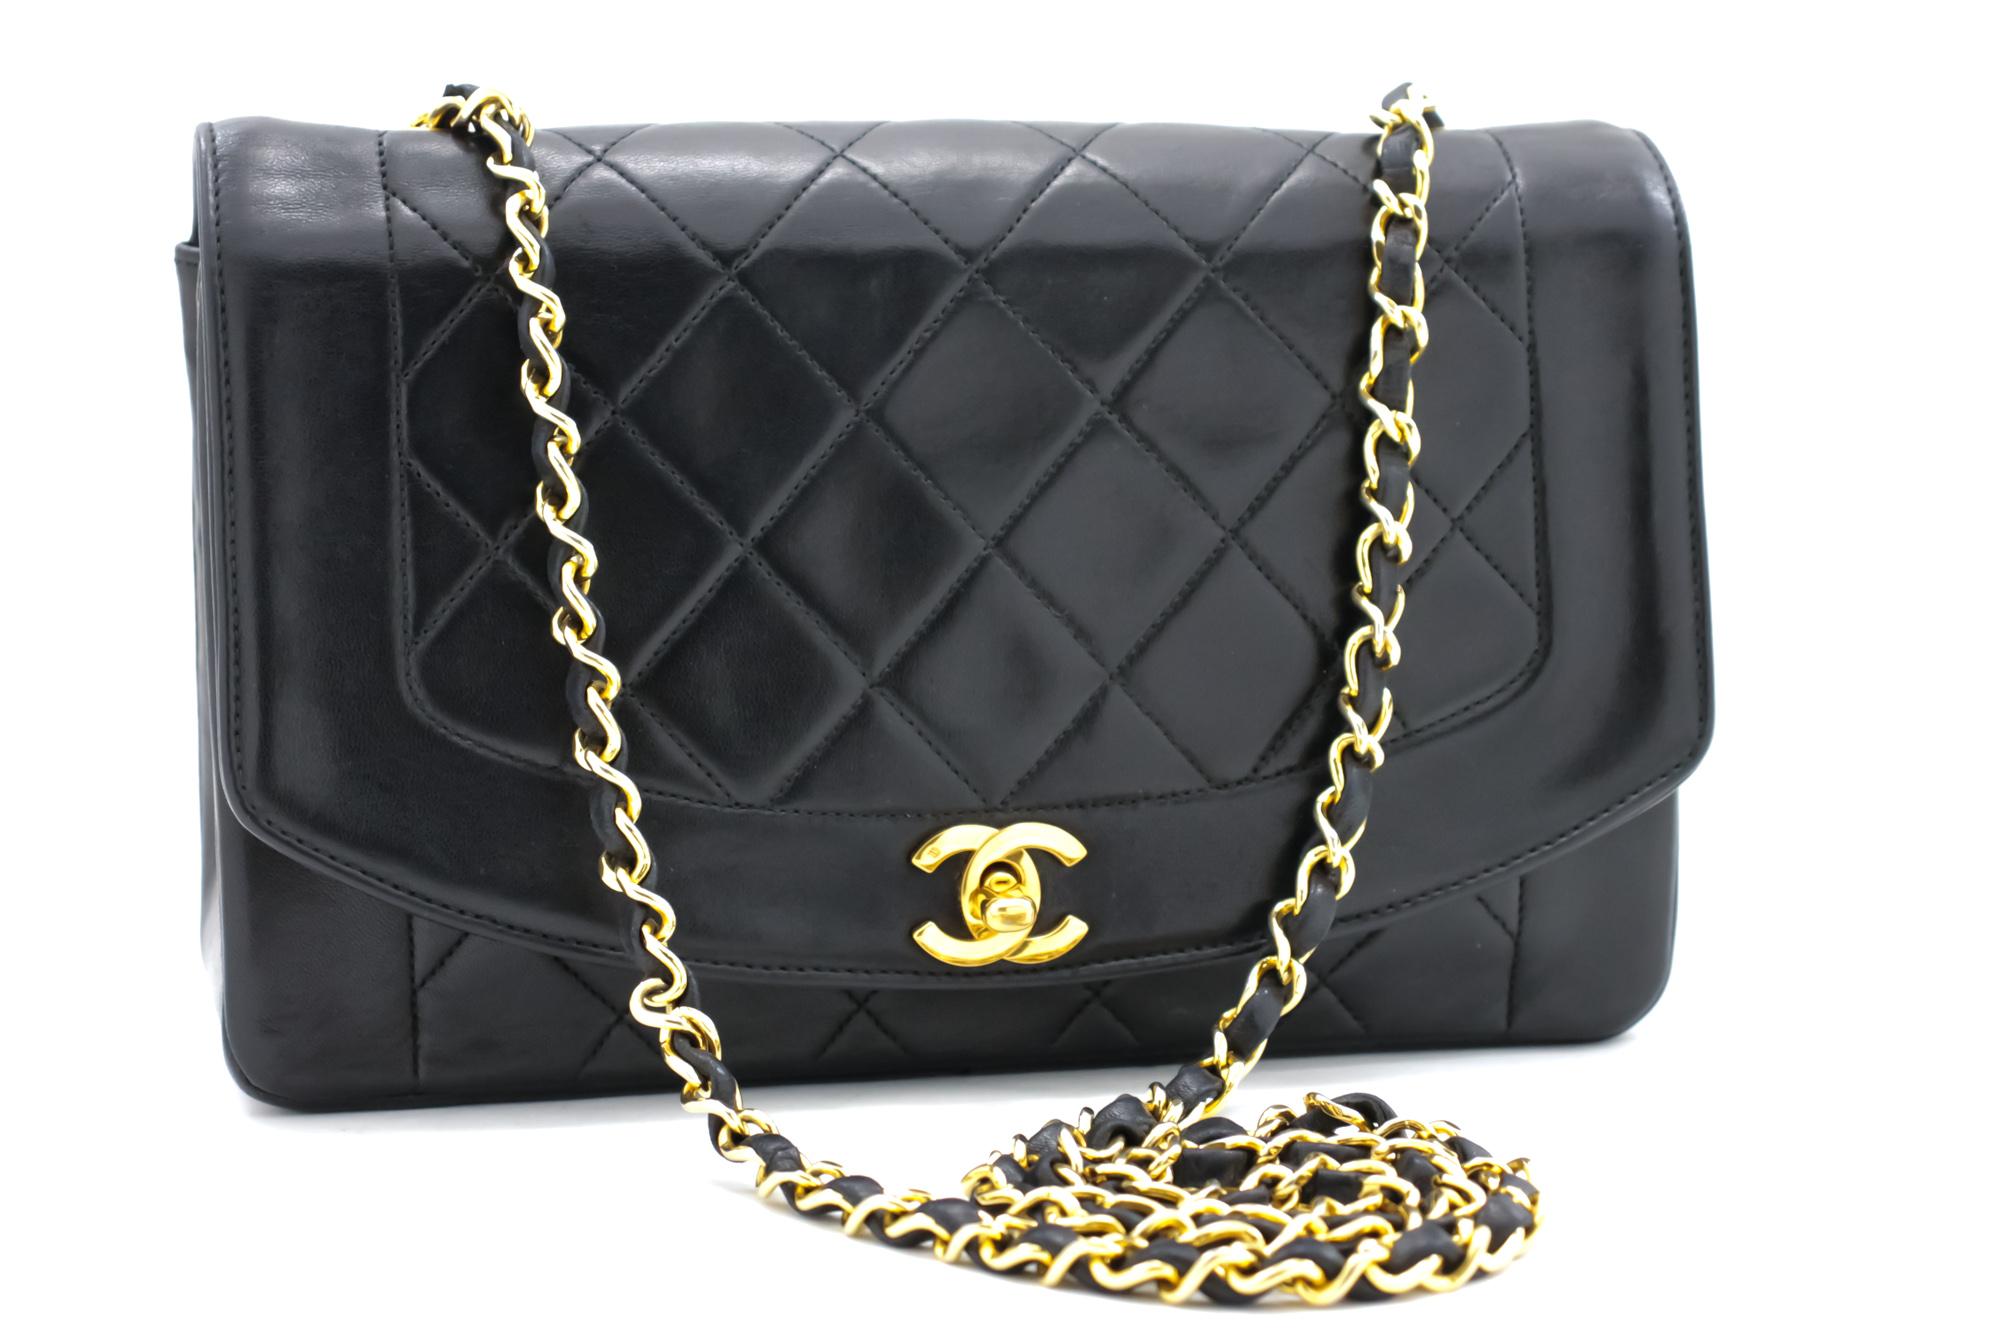 An authentic CHANEL Diana Flap Chain Shoulder Bag Crossbody Black Quilted Lamb. The color is Black. The outside material is Leather. The pattern is Solid. This item is Vintage / Classic. The year of manufacture would be 1989-1991.
Conditions &